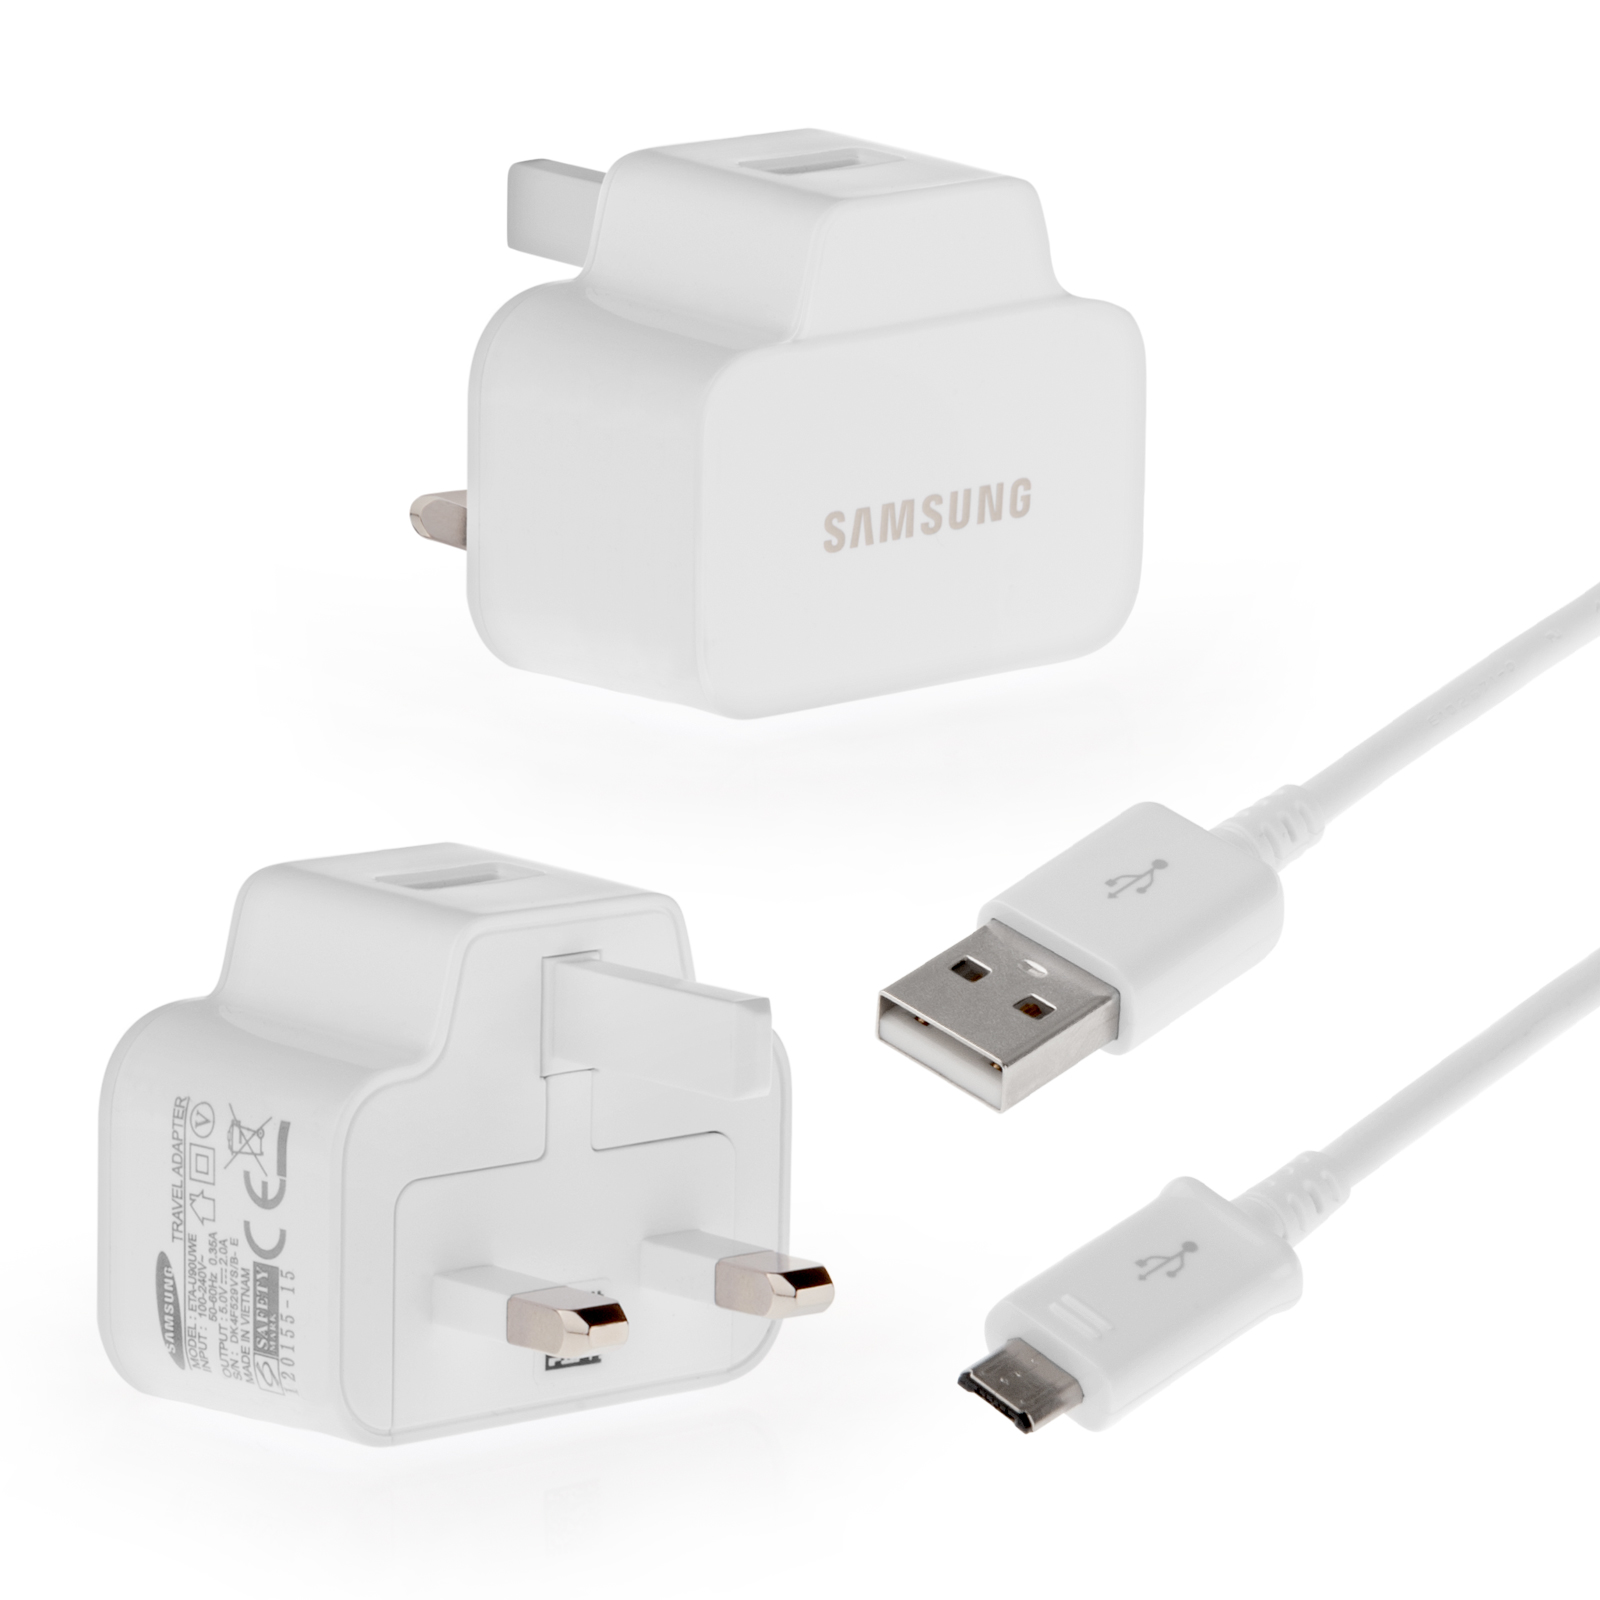 Official Samsung Micro USB Charger and Data Cable